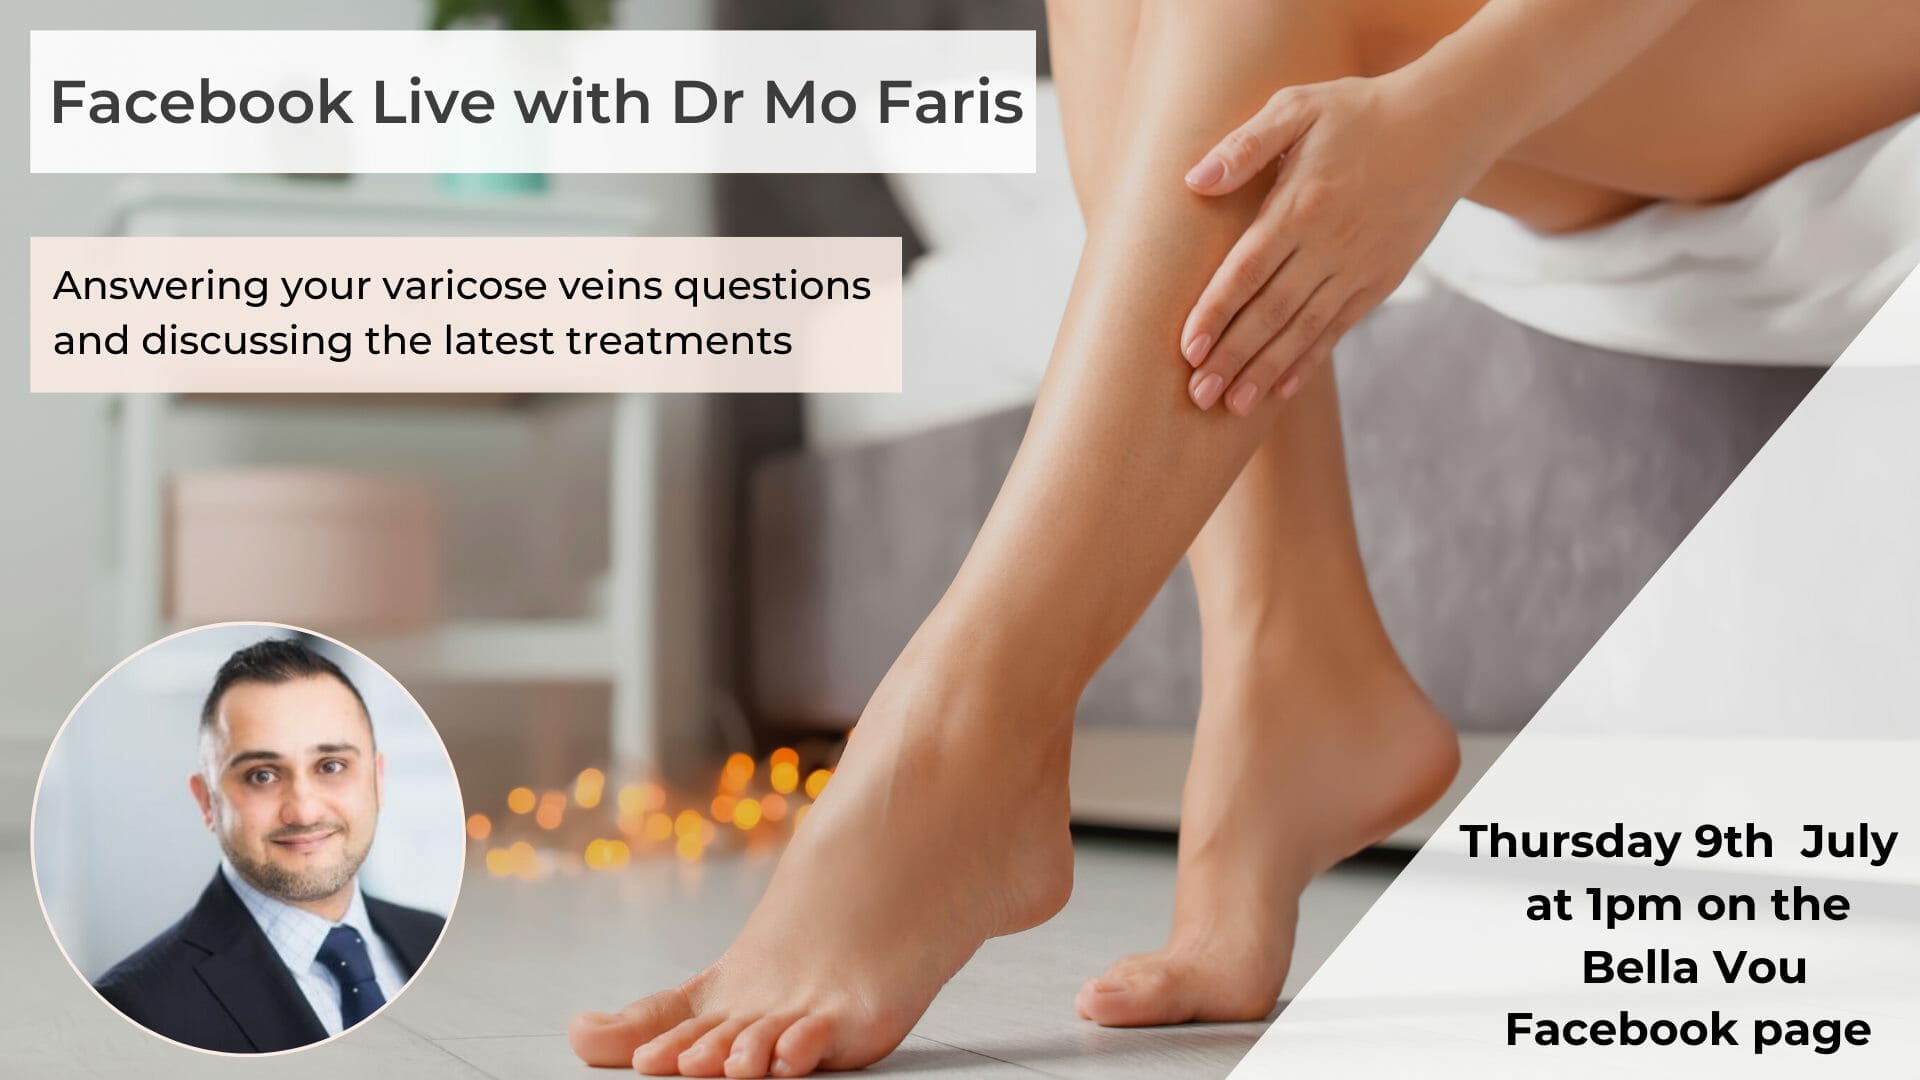 Facebook Live with Dr Mo Faris discussing Varicose Veins